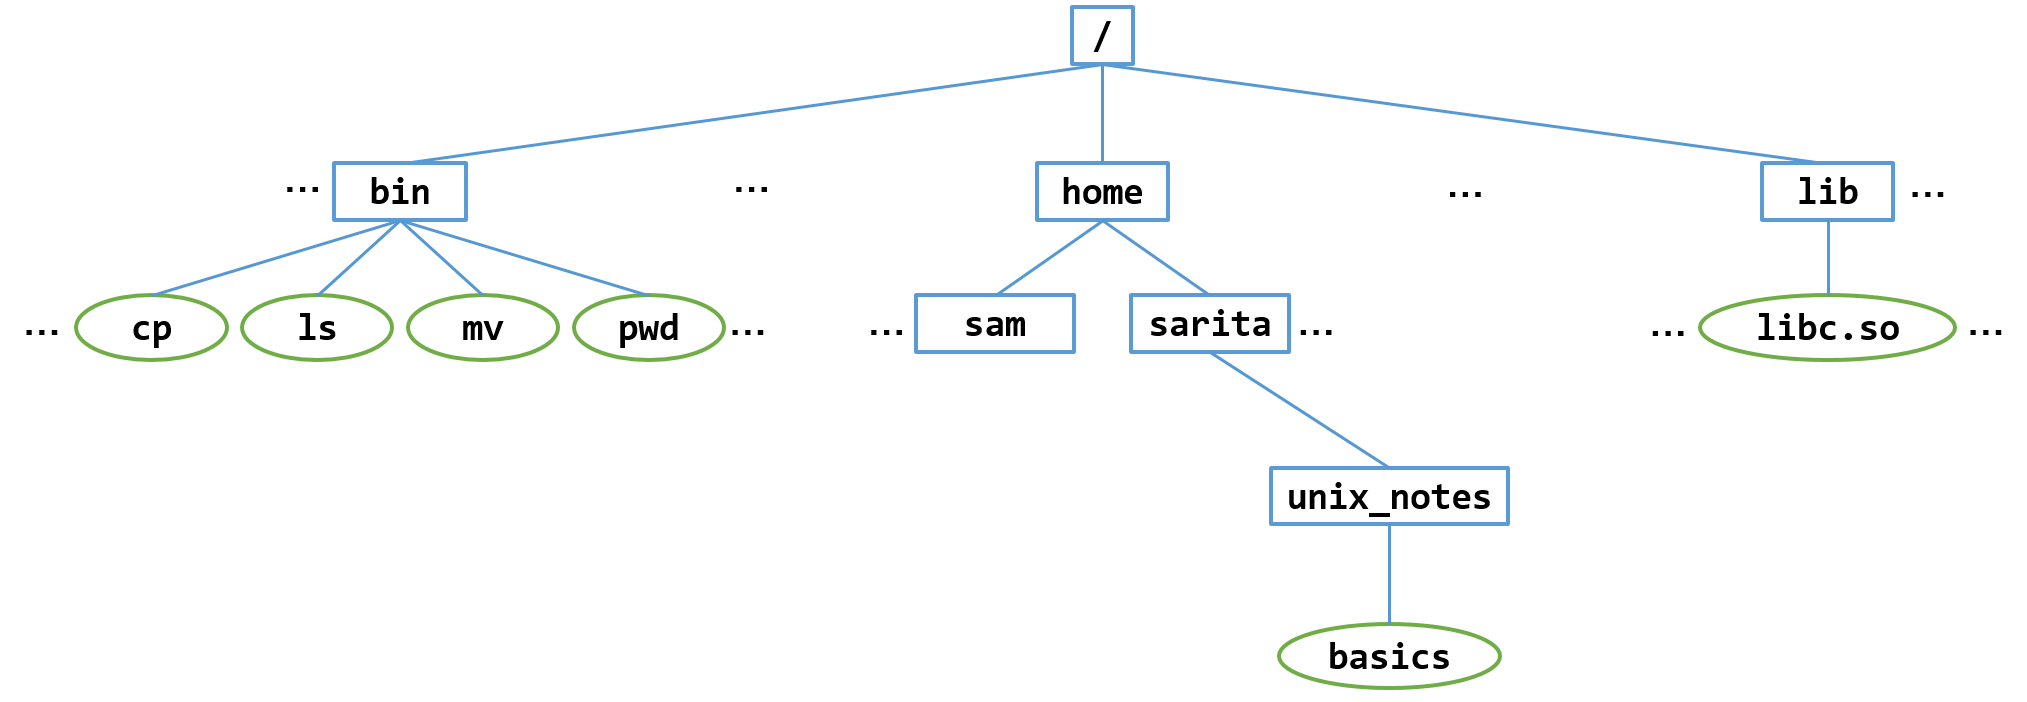 The unix file system with root directory at top, with example child directories bin, home, lib, and two example subdirectories under home sam and sarita.